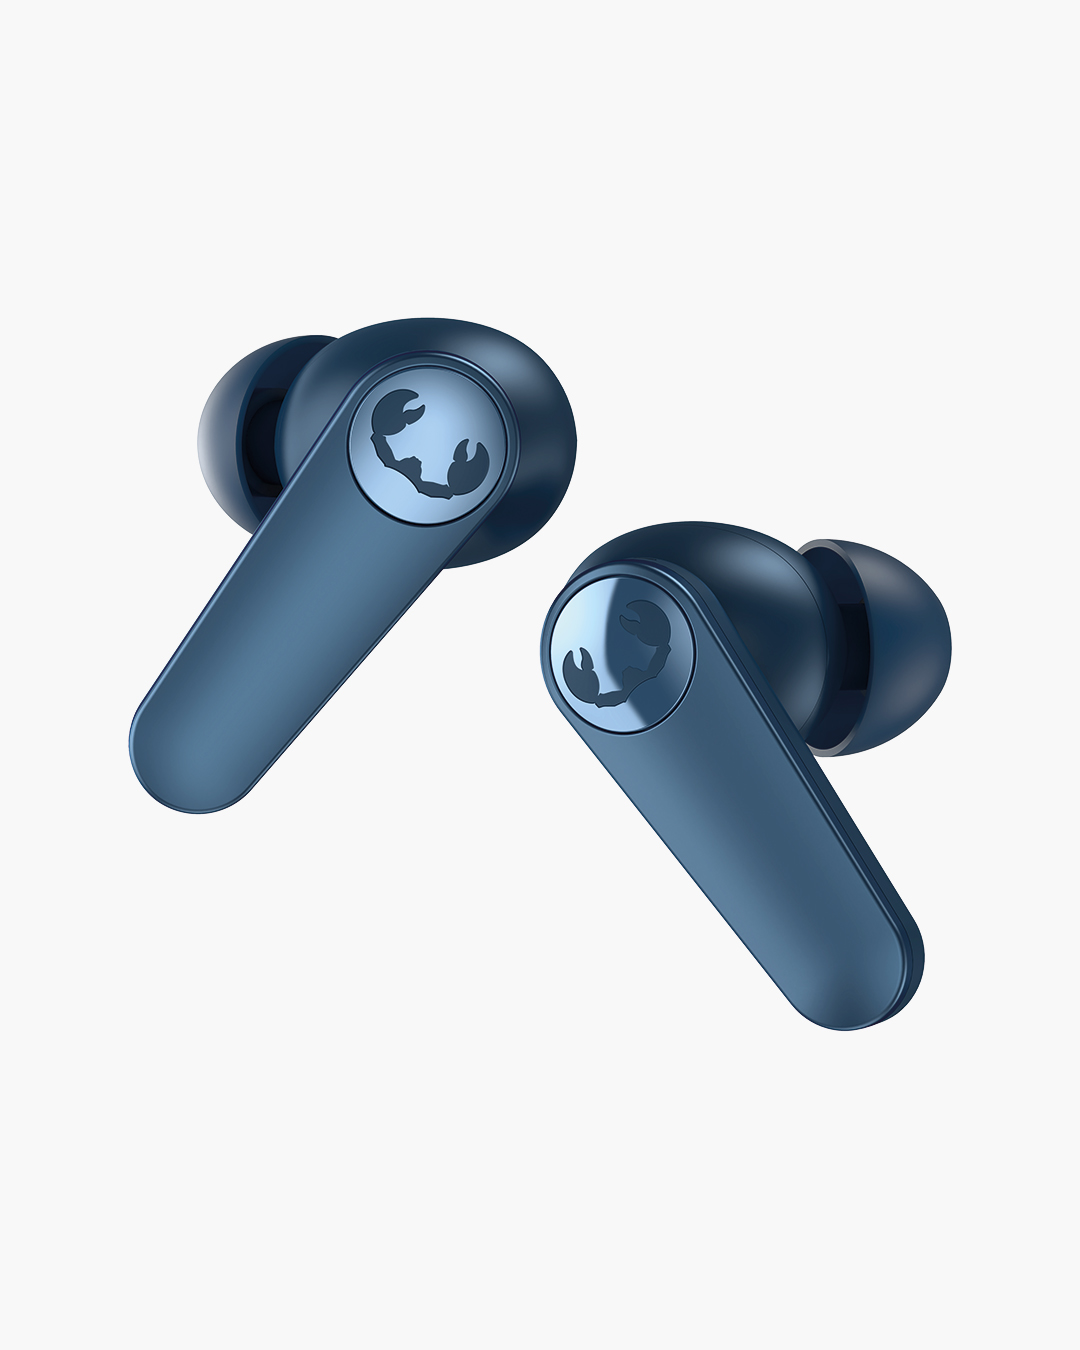 Fresh 'n Rebel - Twins ANC - True Wireless In-ear headphones with active noise cancelling - Steel Blue